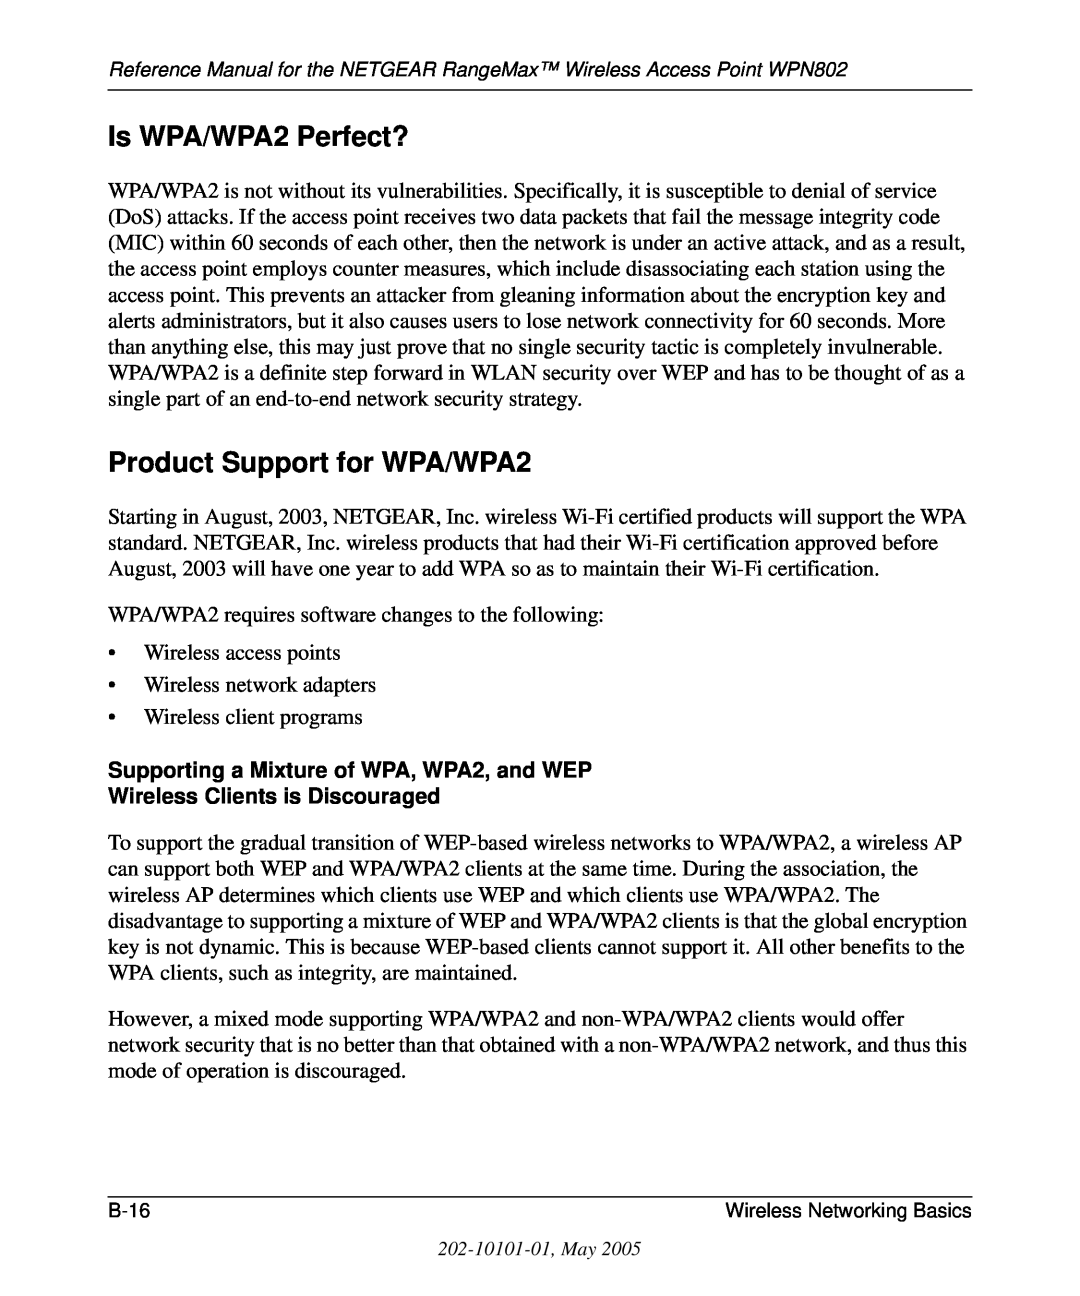 NETGEAR WPN802 manual Is WPA/WPA2 Perfect?, Product Support for WPA/WPA2, Supporting a Mixture of WPA, WPA2, and WEP 